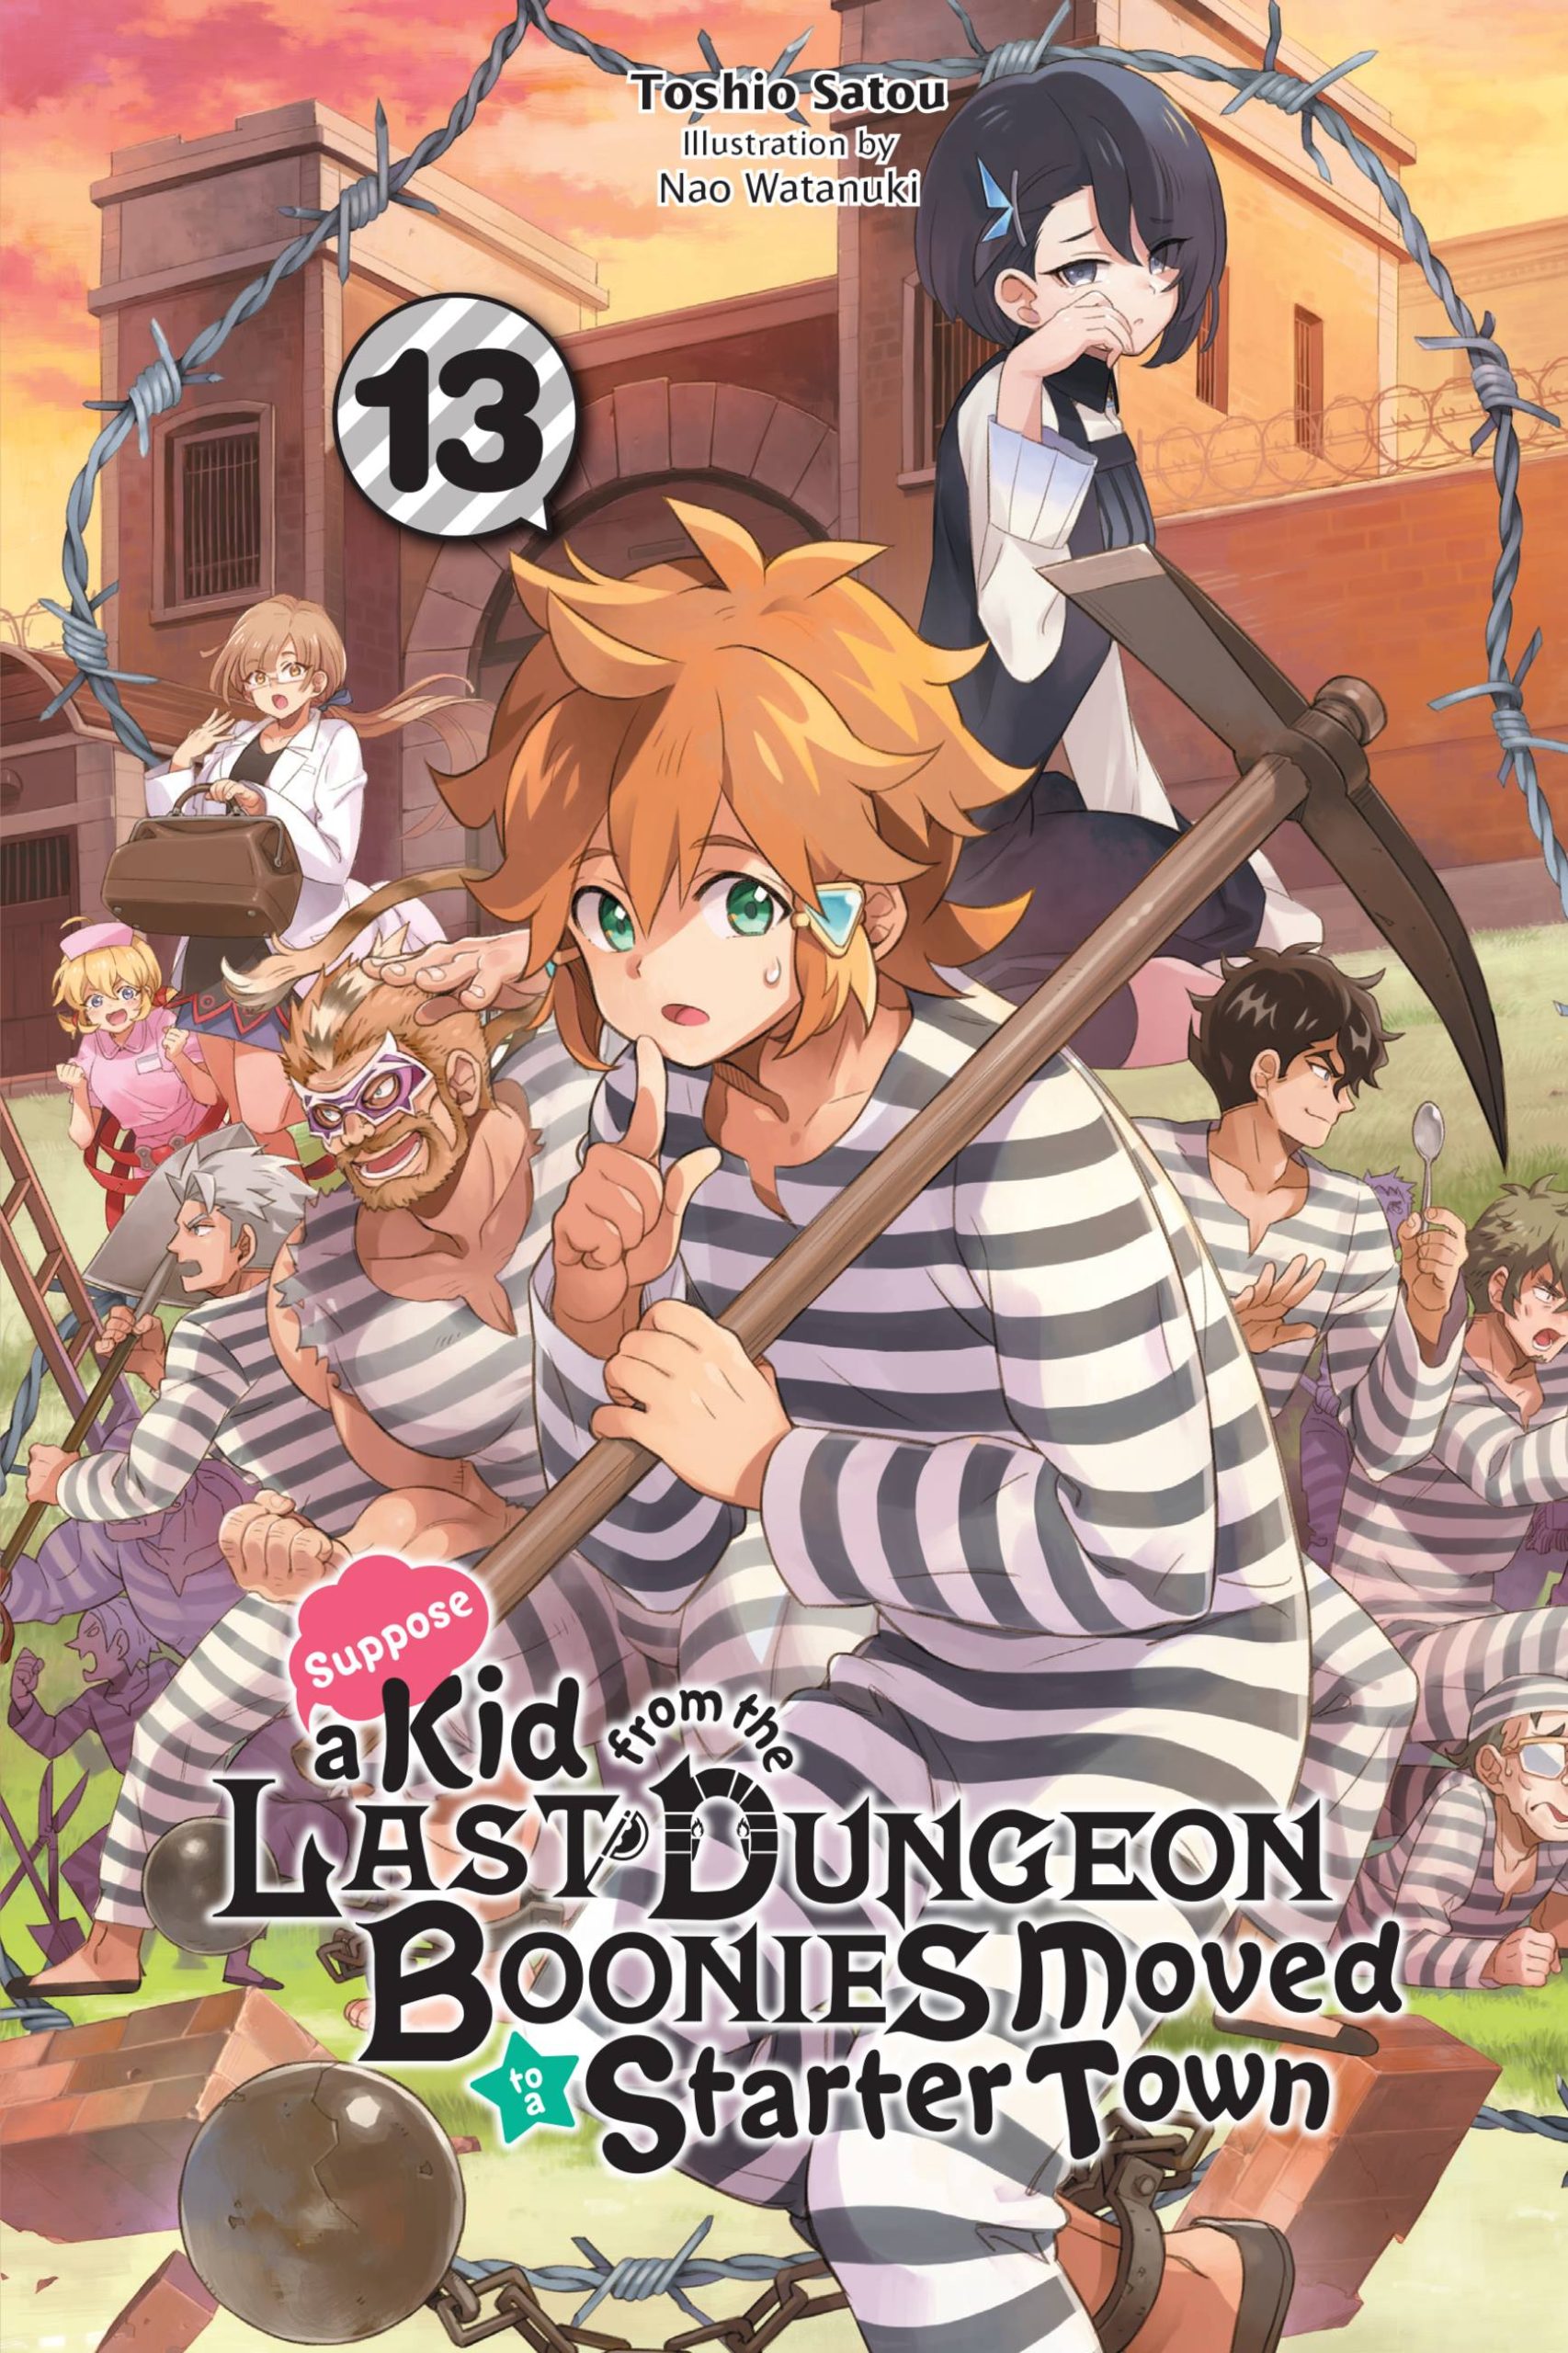 Suppose a Kid From the Last Dungeon Boonies moved to a starter town? Series  Review | 100 Word Anime